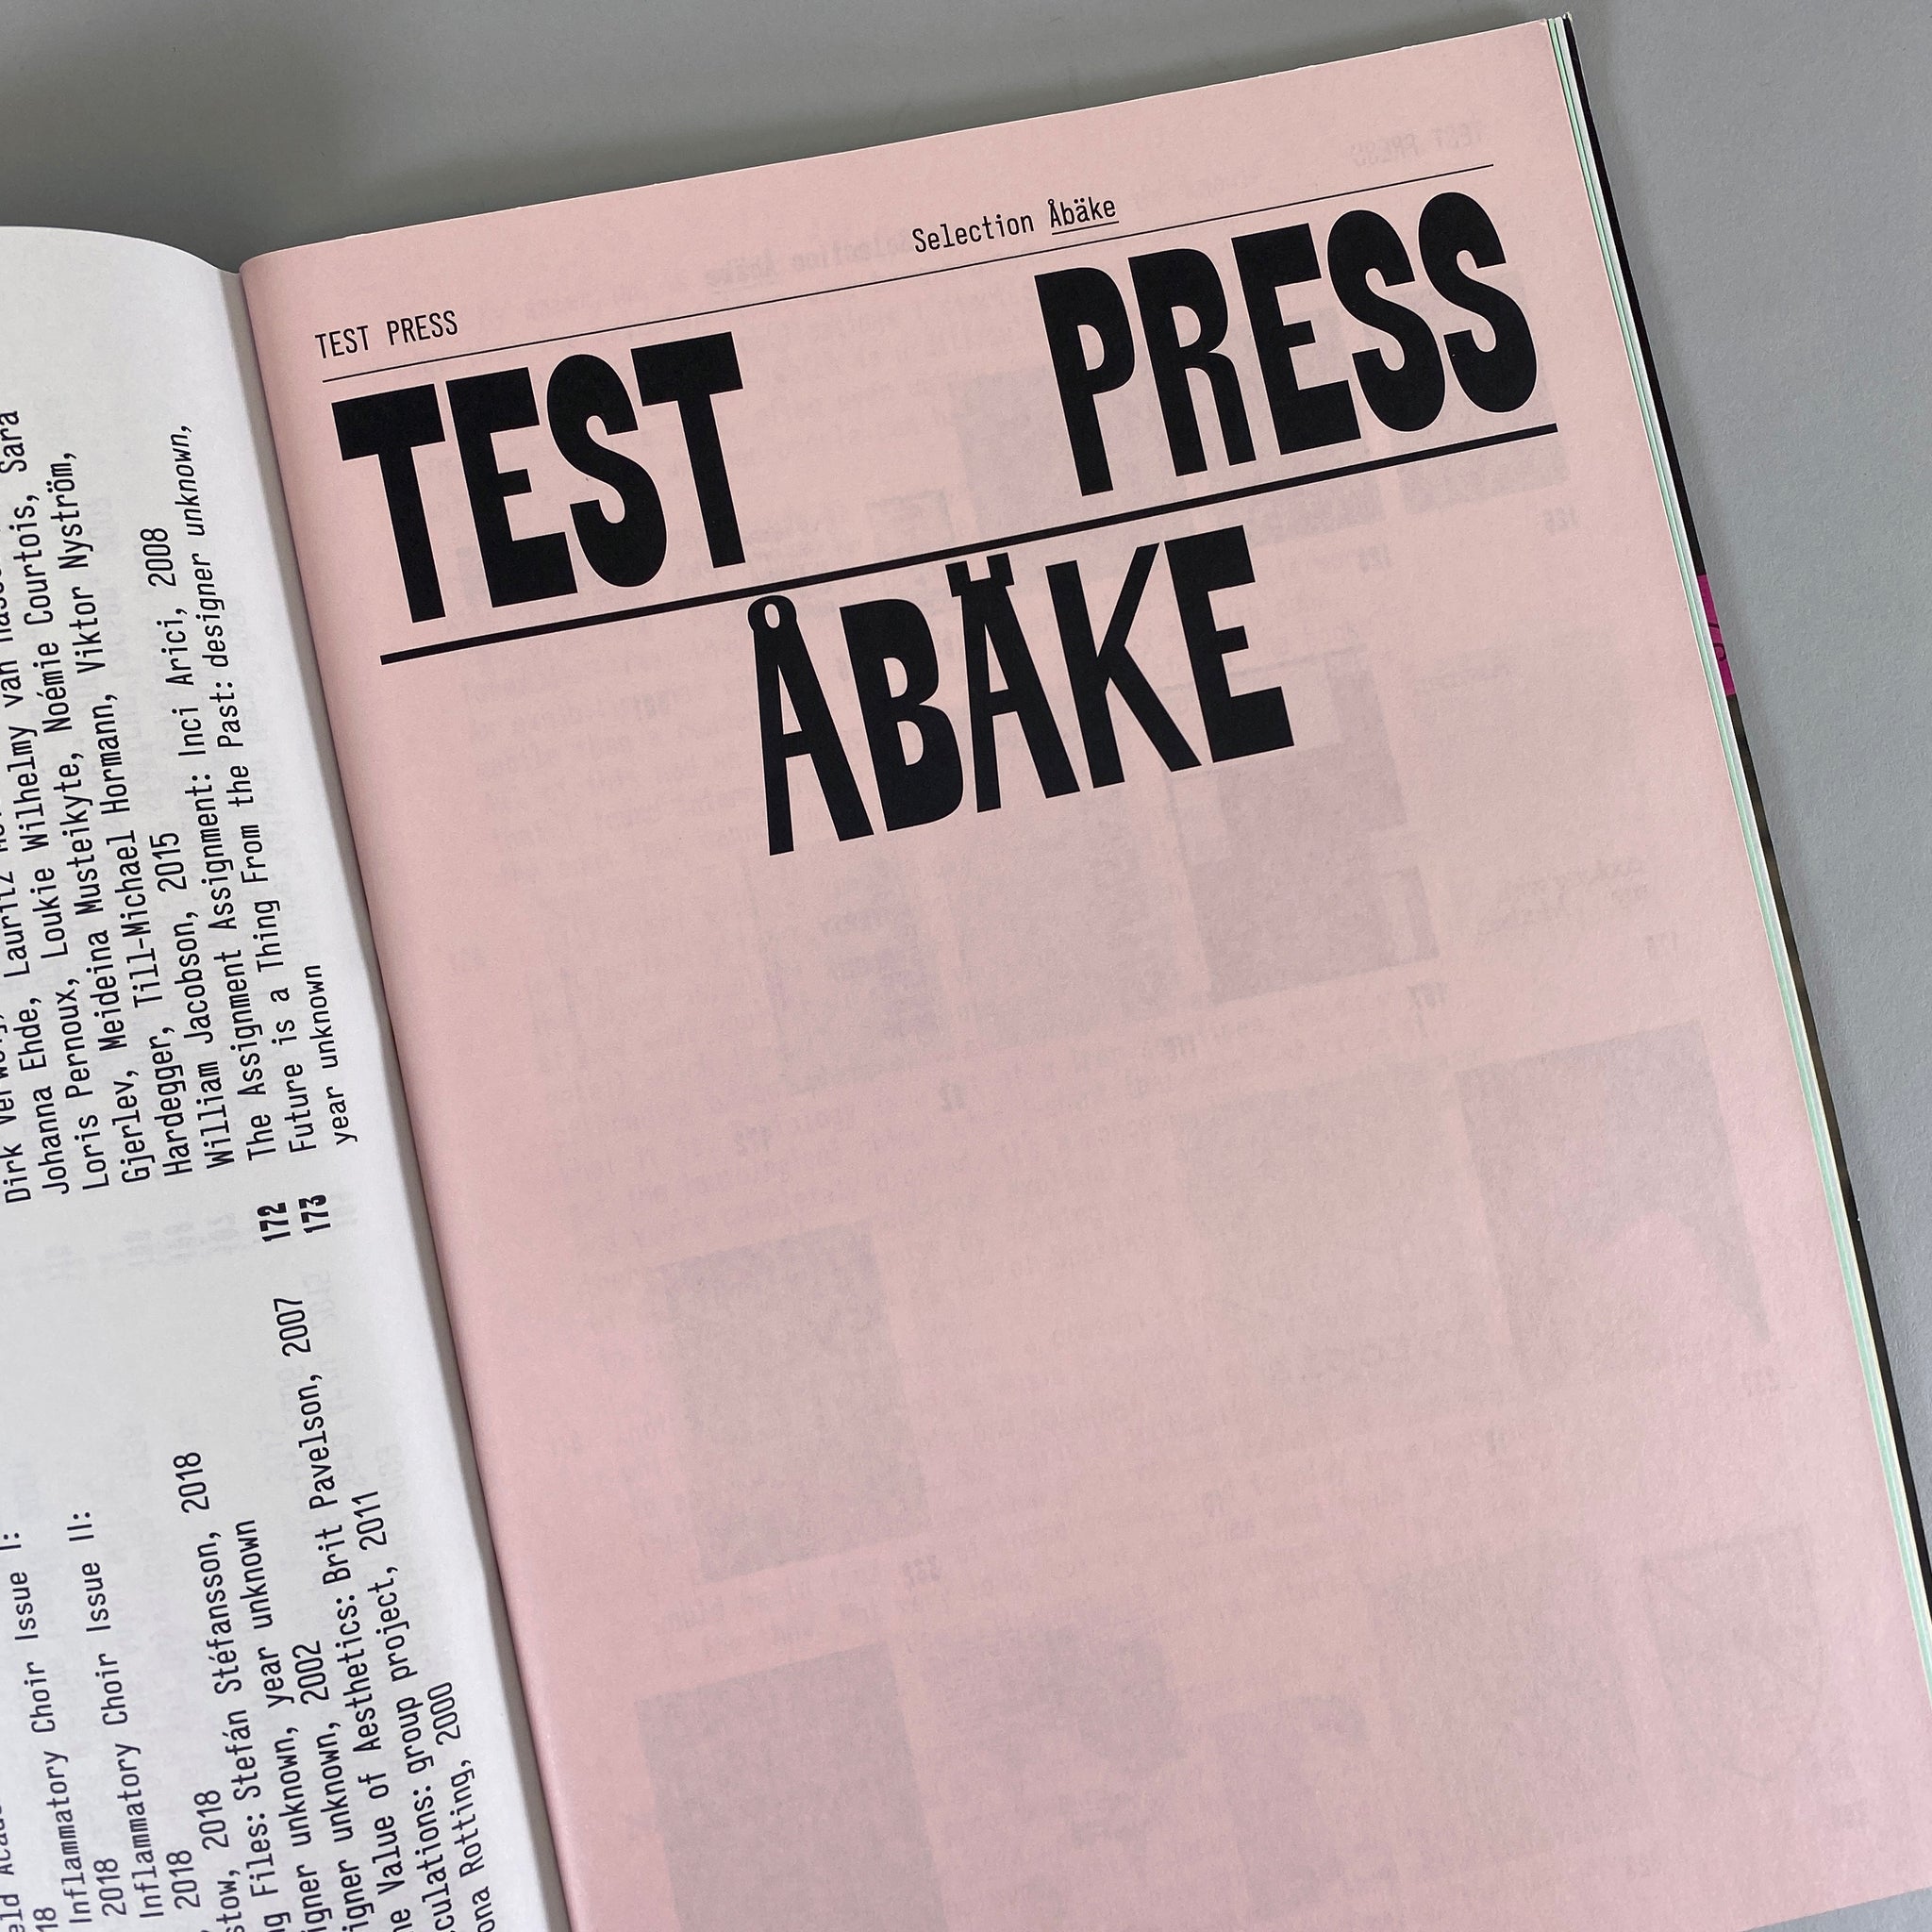 Test Press: 20 Years of Student Publications, 1999-2019